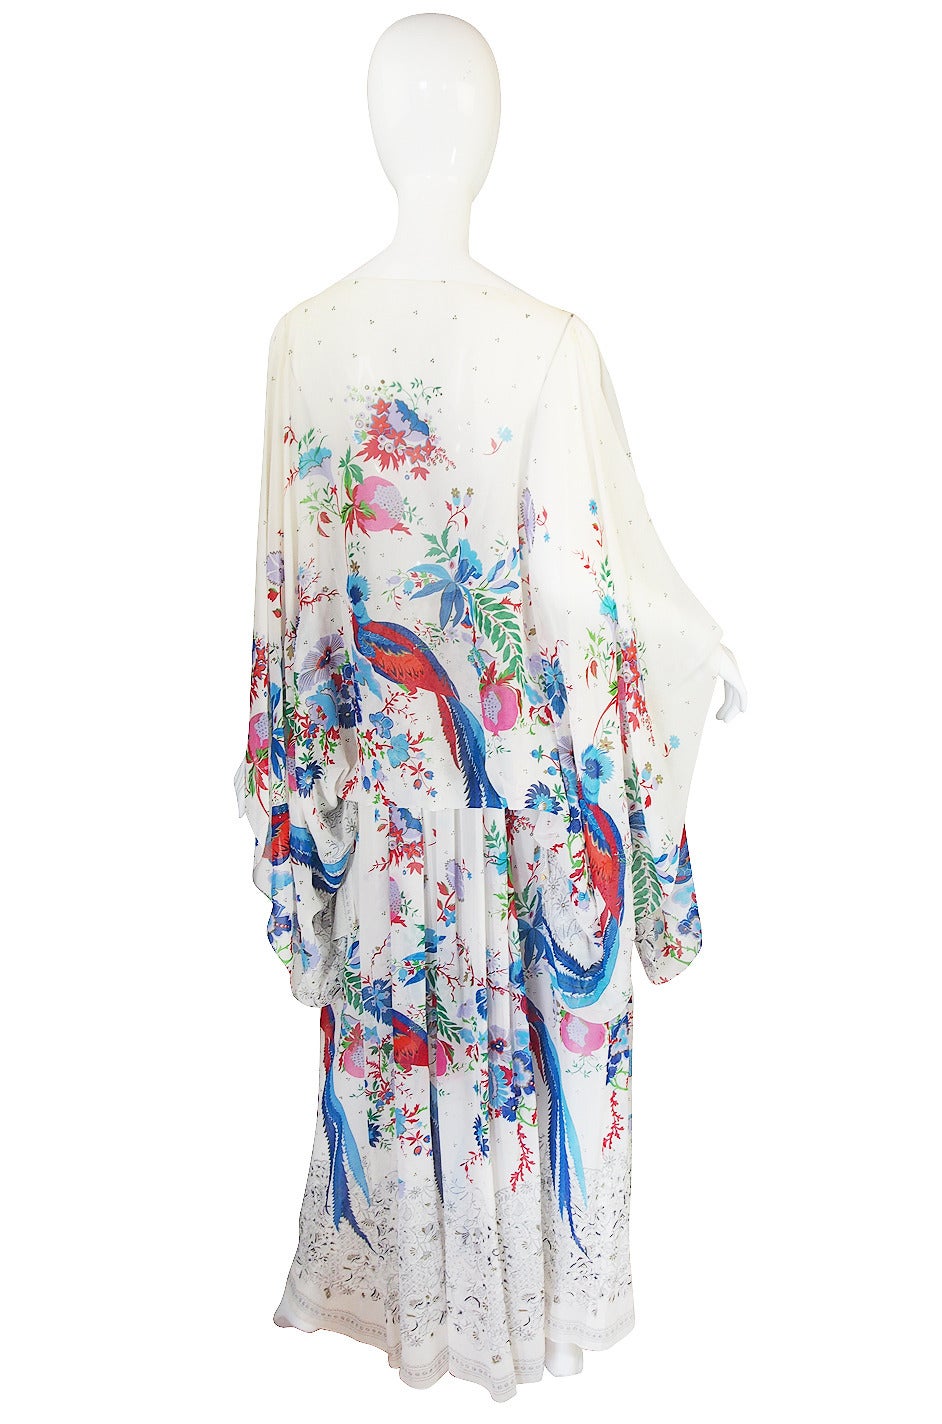 This stunning and romantic printed silk chiffon gown is by Oscar de la Renta. I have seen this before both in a similar version and this print so despite it being unlabeled and that combined with the information from the original owner has me sure